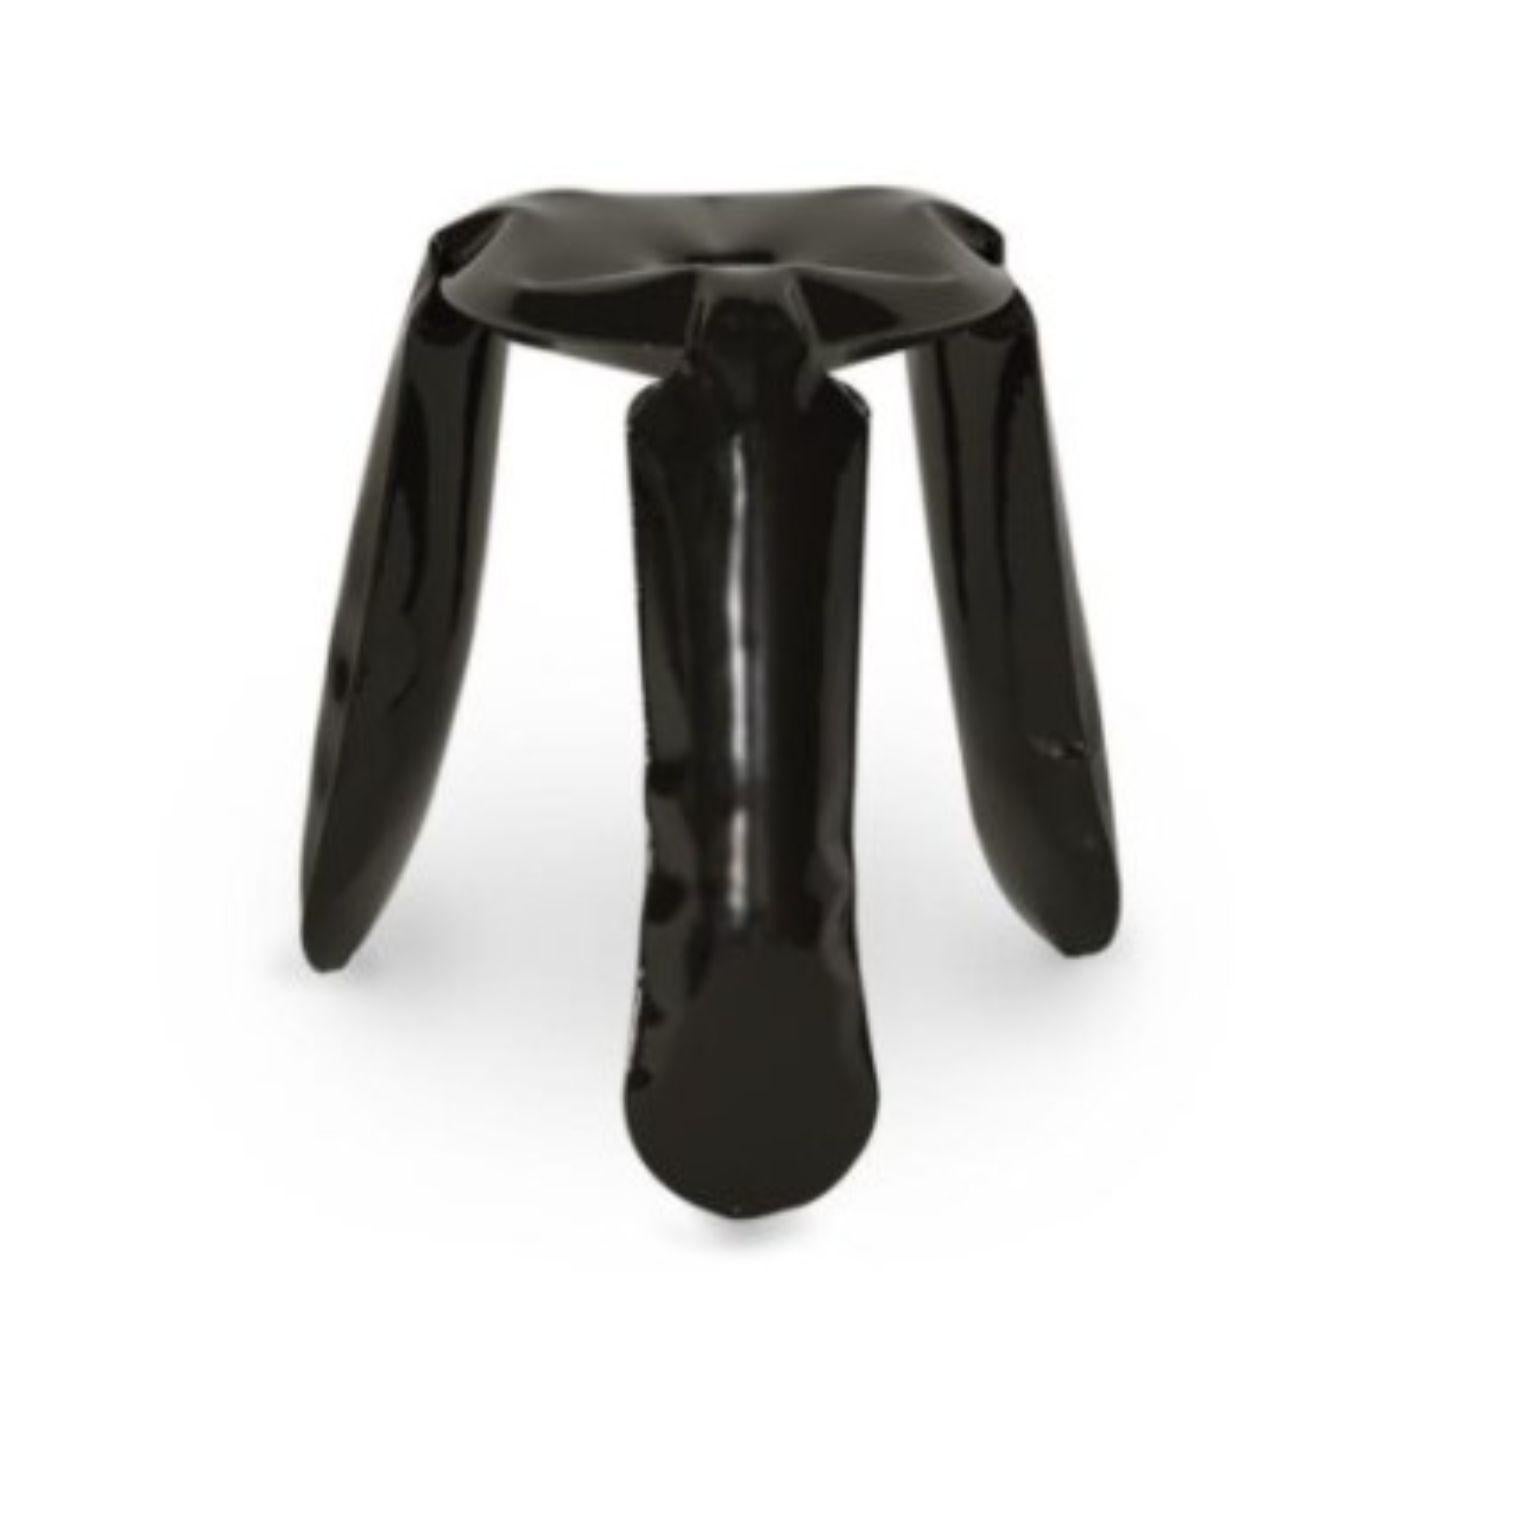 Black glossy steel standard Plopp stool by Zieta
Dimensions: D 35 x H 50 cm 
Material: Carbon steel. 
Finish: Powder-coated. Glossy finish. 
Available in colors: Graphite, moss grey, umbra grey, beige grey, blue grey. Available in stainless steel,